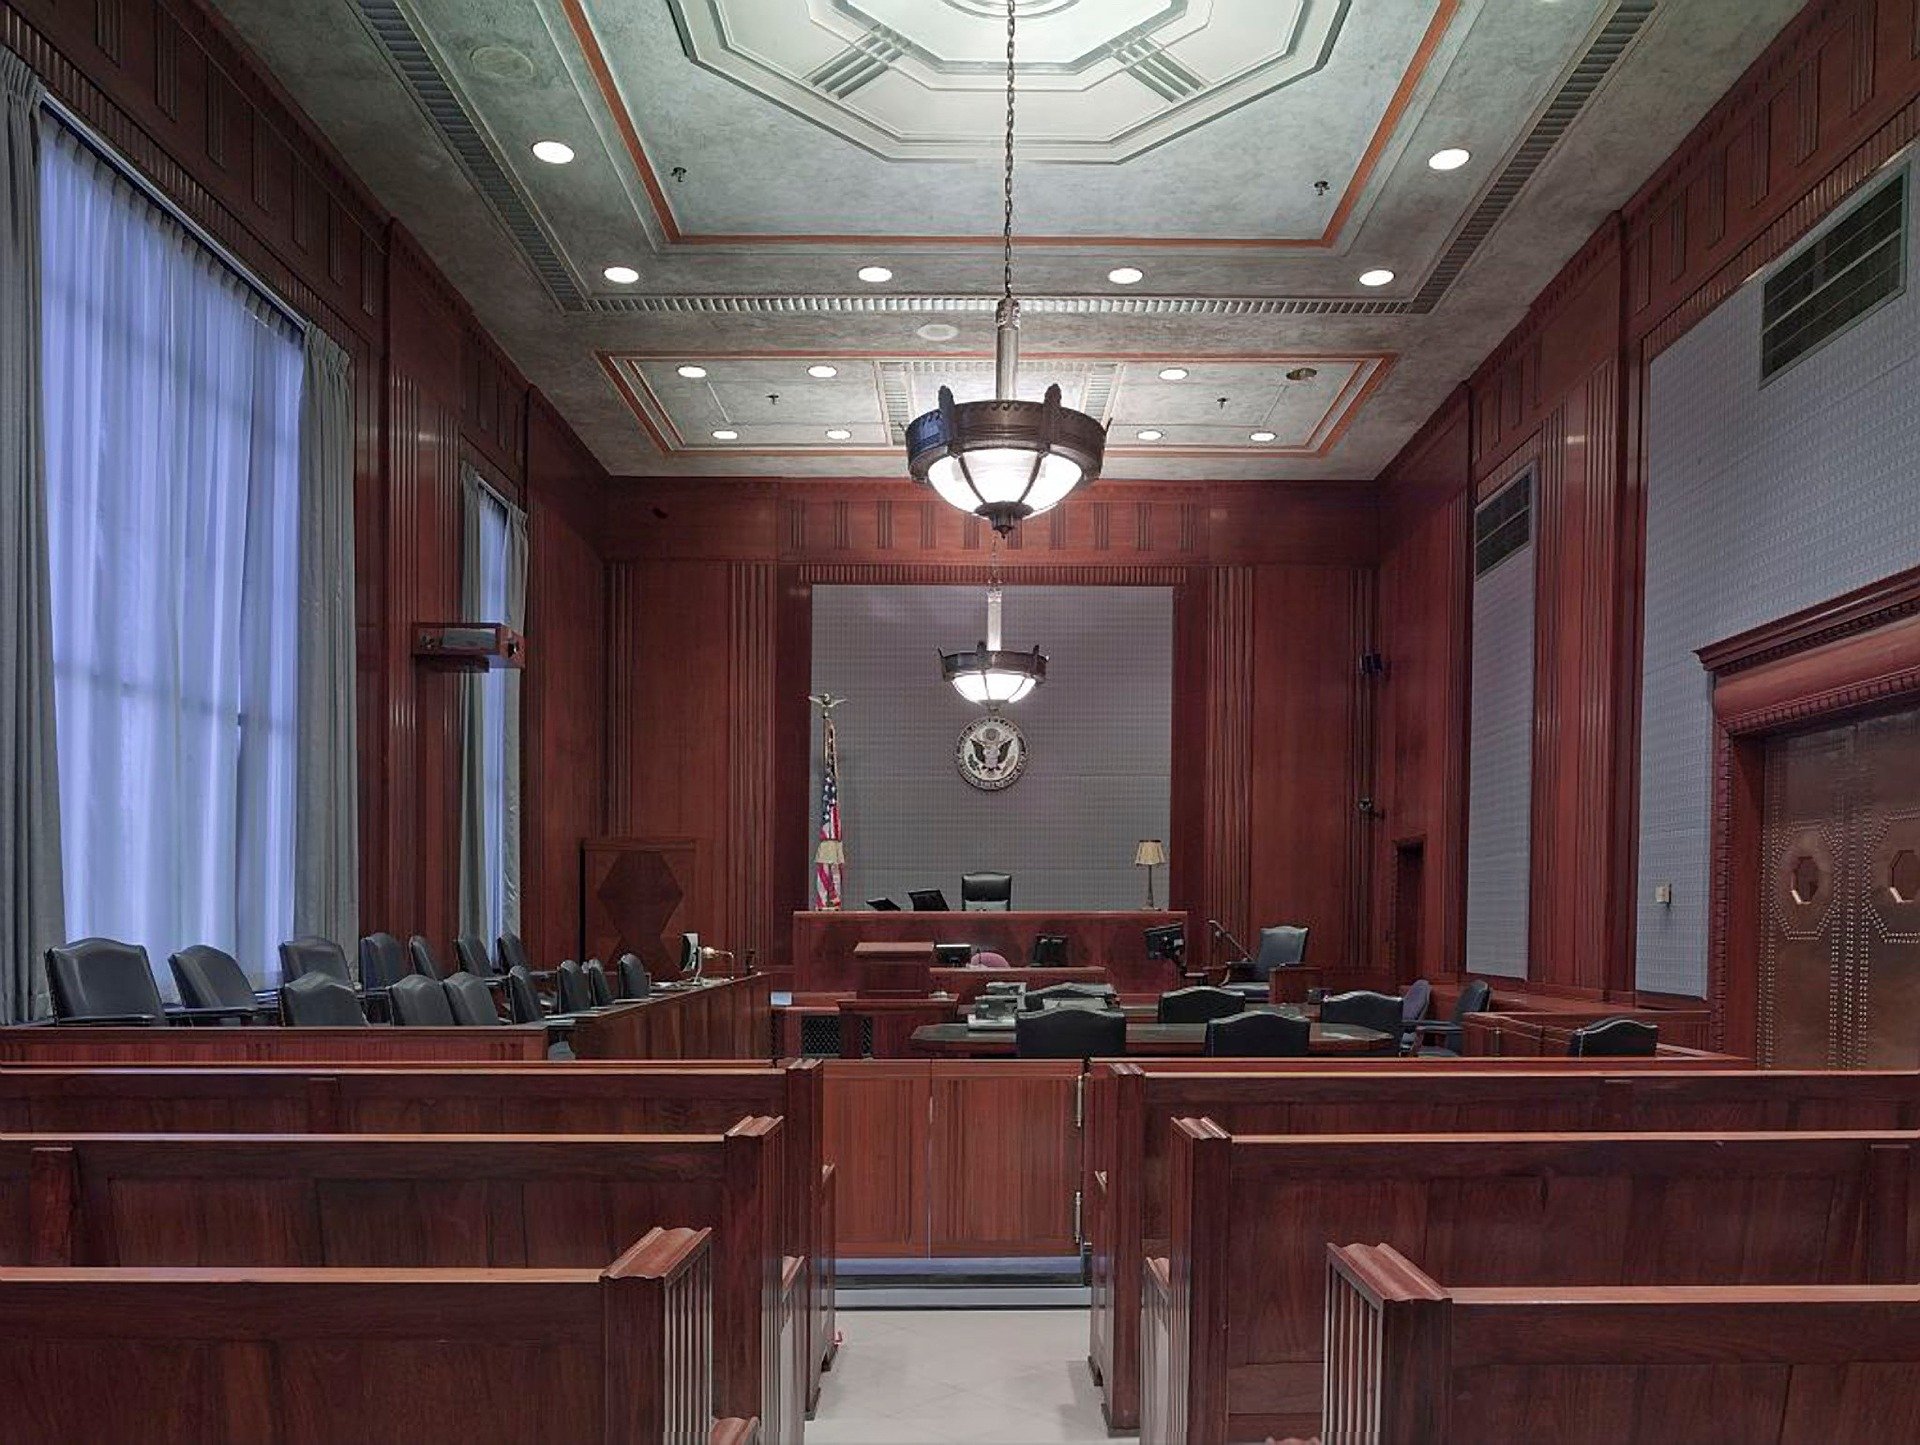 Courtroom Benches Seats | Source: Pixabay